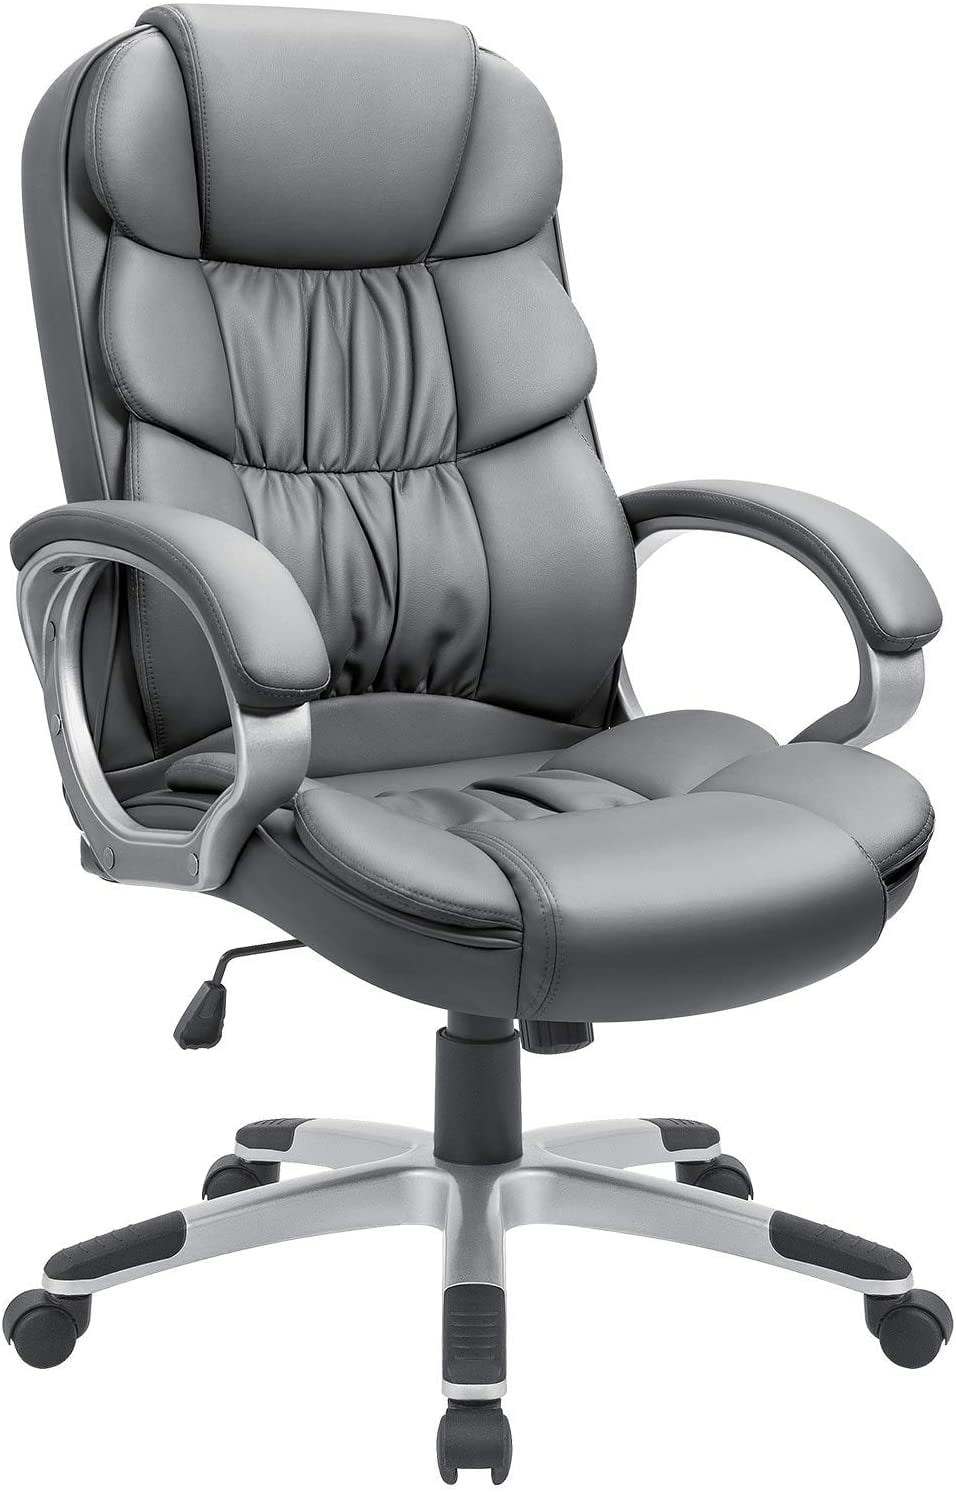 High Back Soft Padded Executive Management Office Chair PU LEATHER 